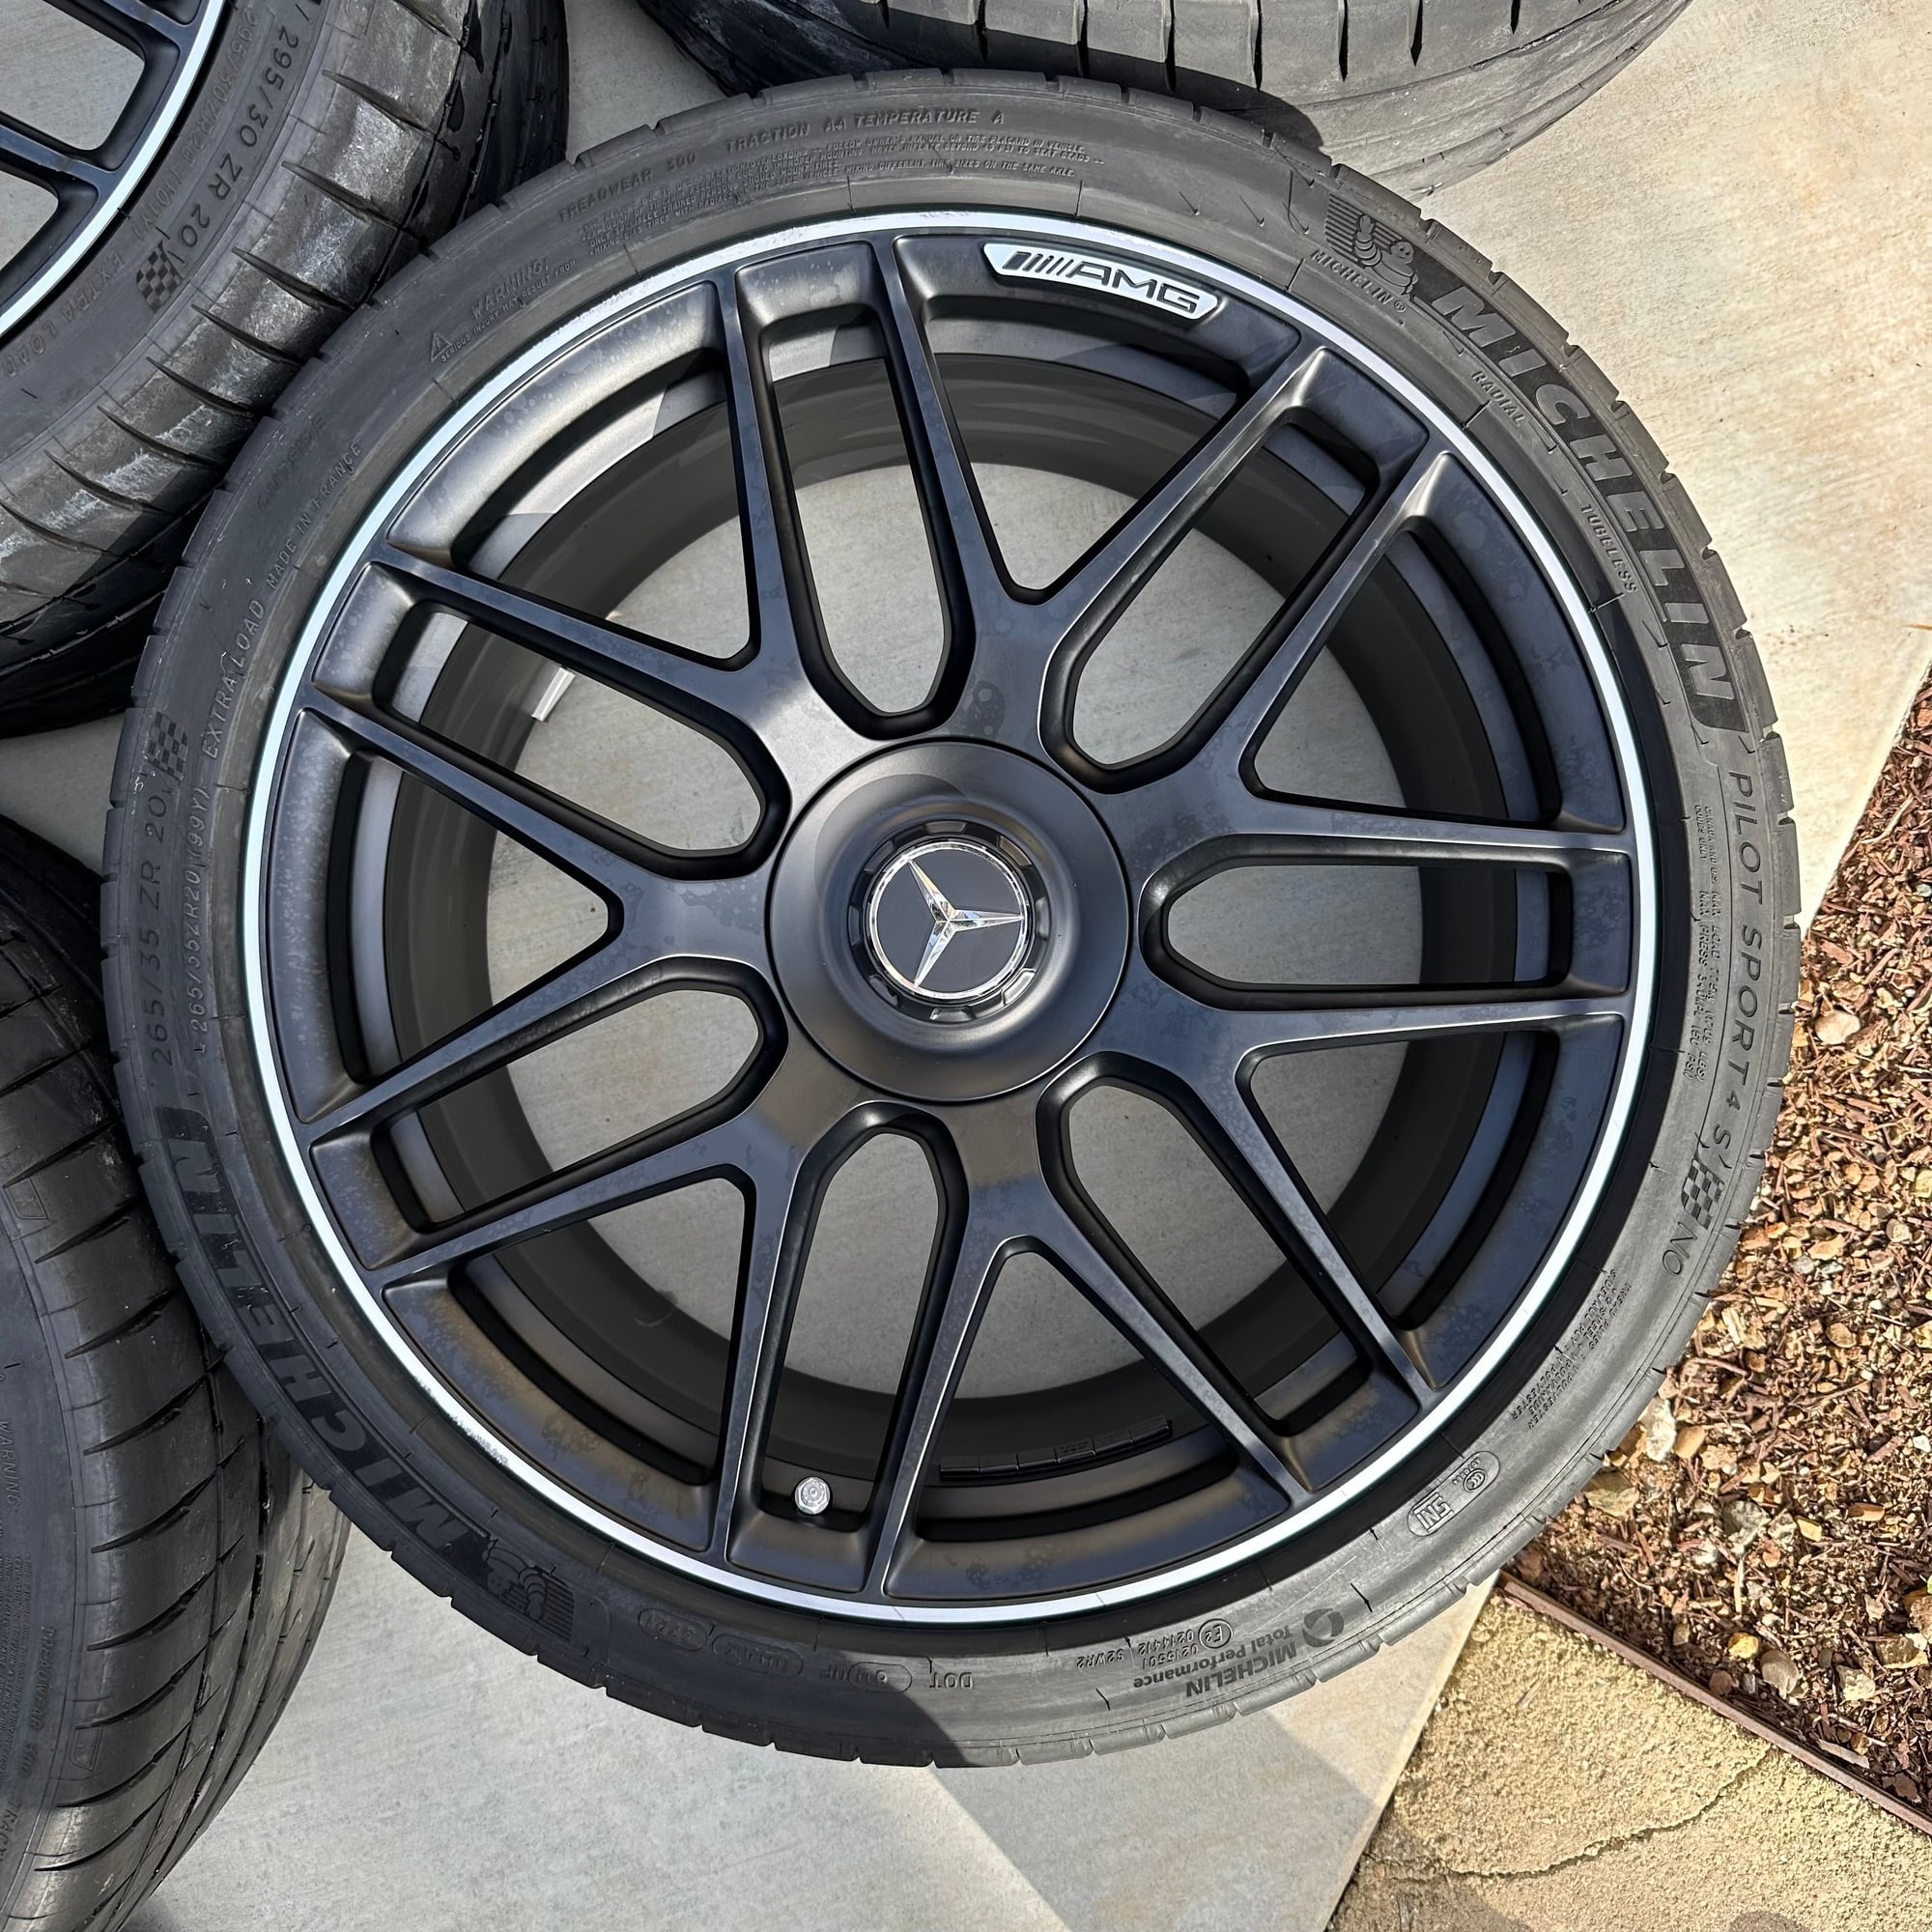 Wheels and Tires/Axles - 20" AMG forged cross-spoke wheels off W213 E63 - Used - 2018 to 2023 Mercedes-Benz E63 AMG - Mountain View, CA 94041, United States